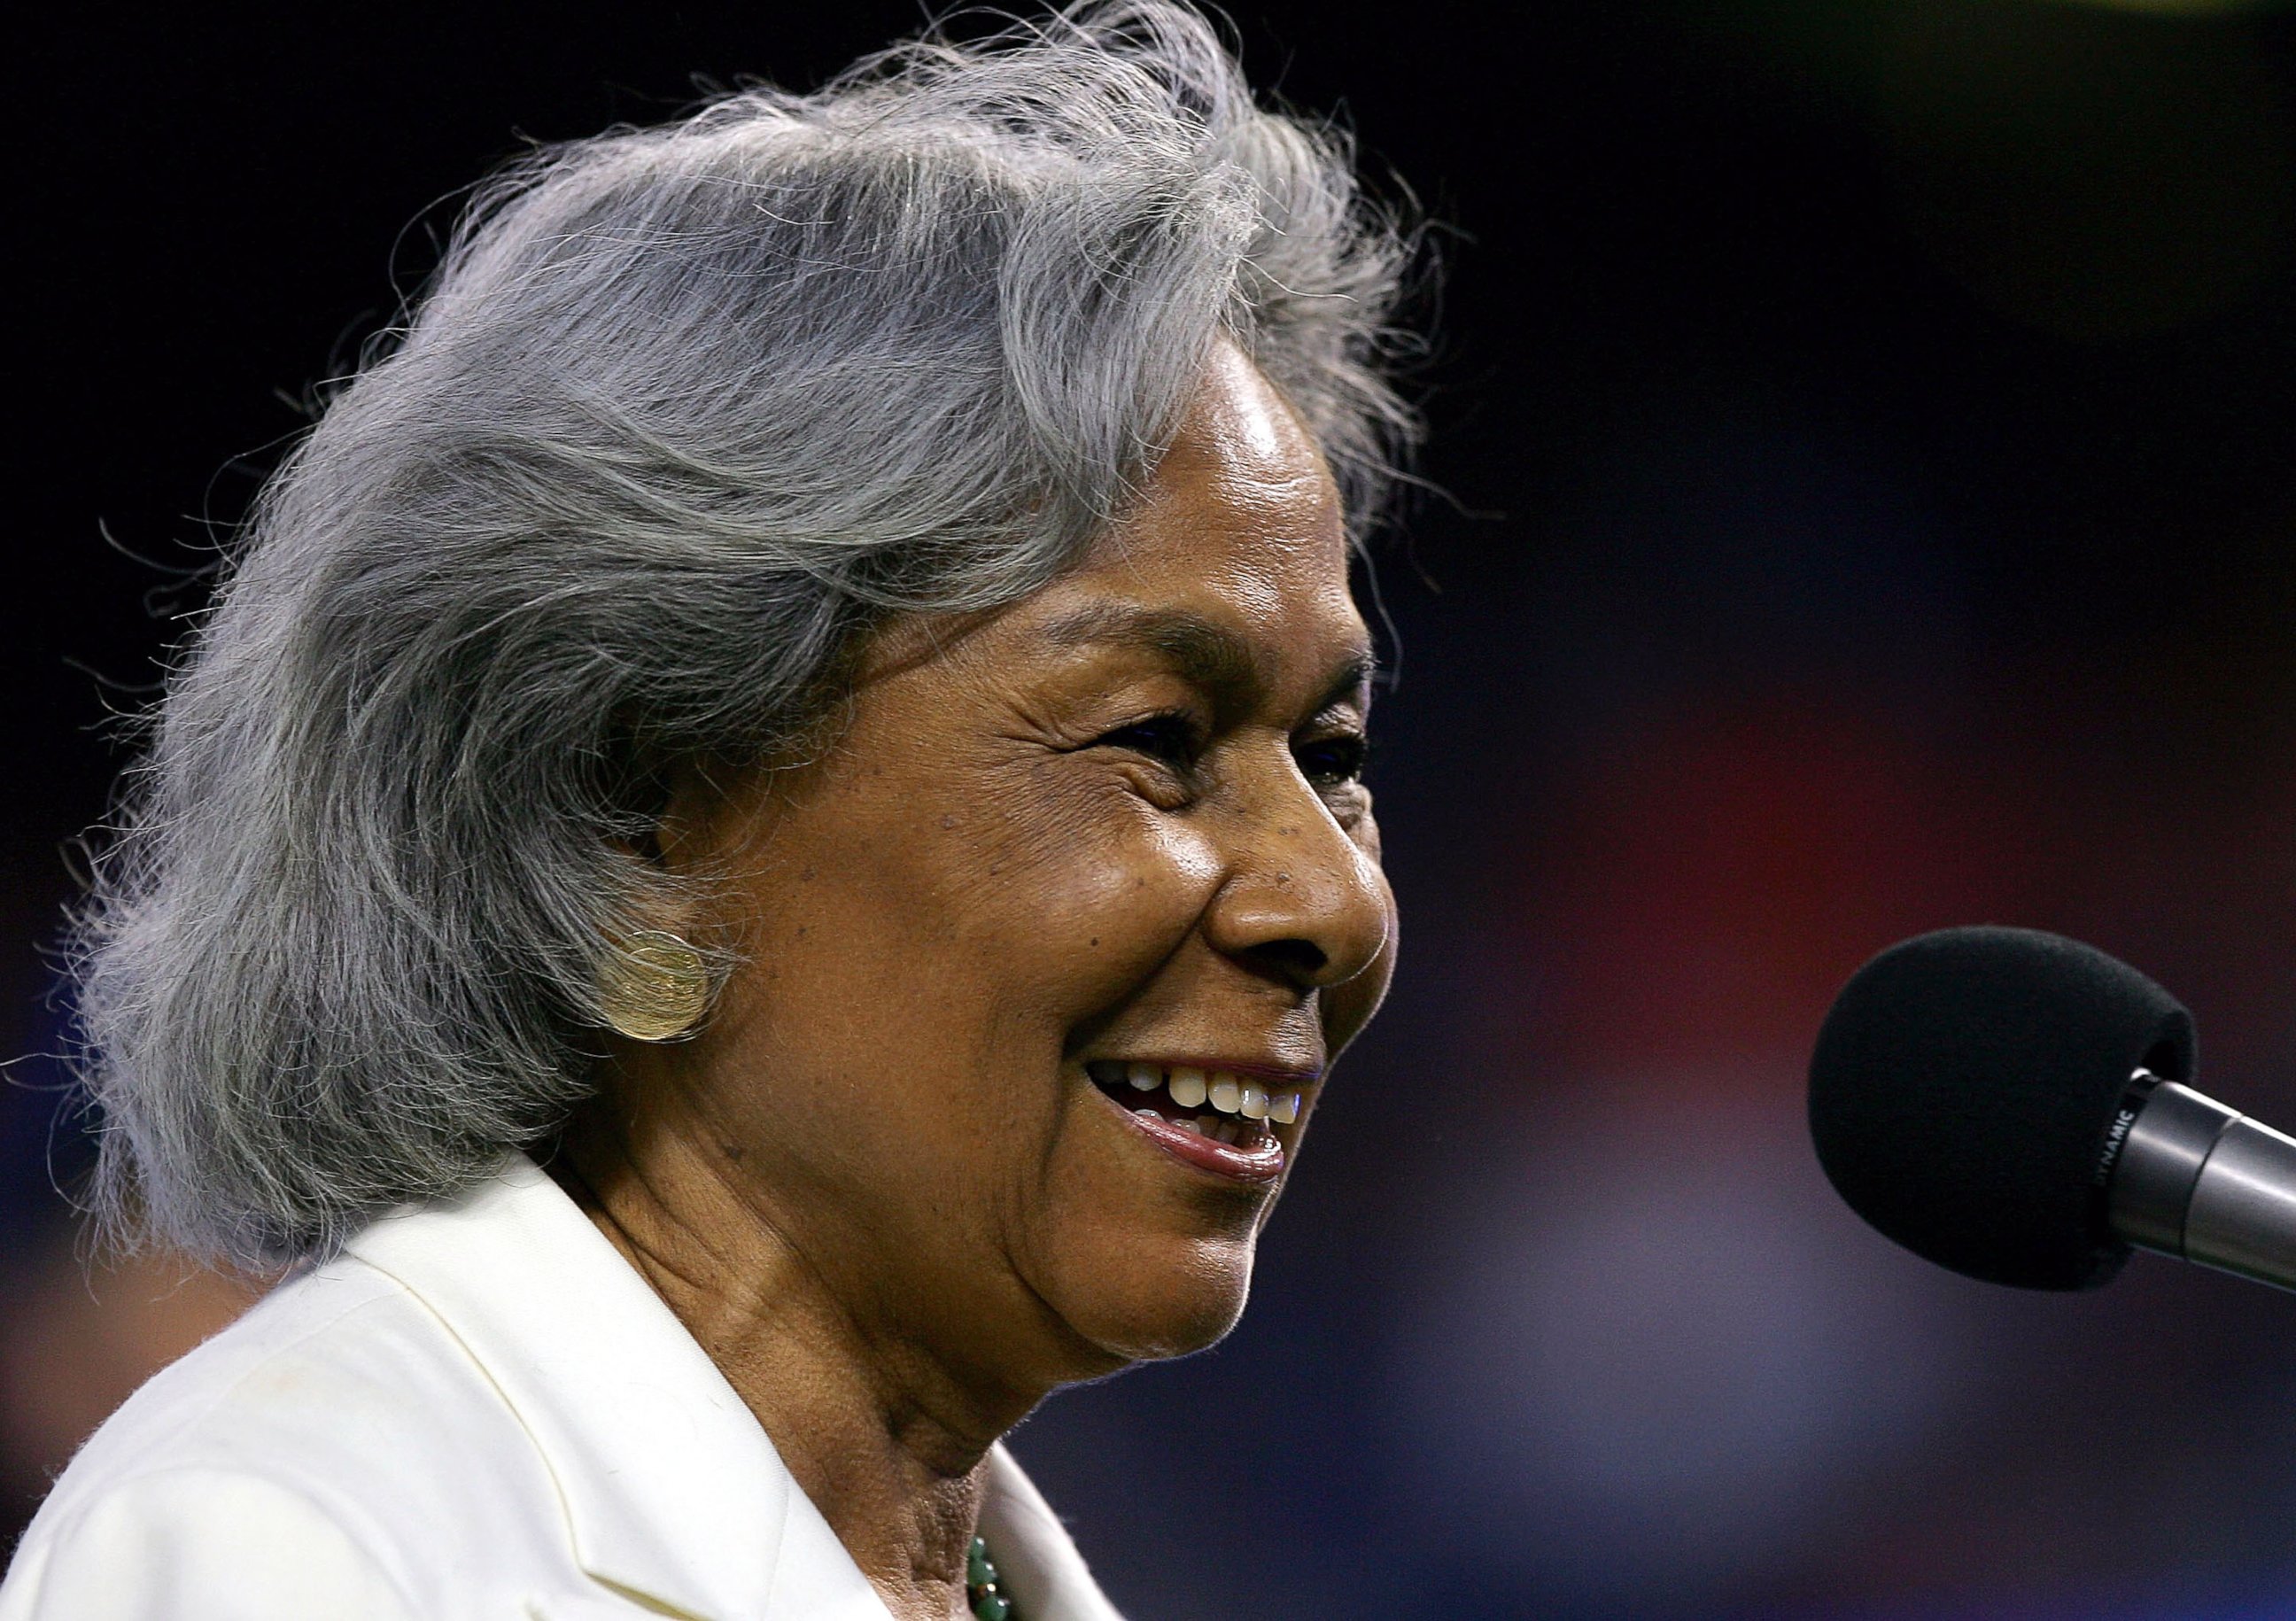 PHOTO: Rachel Robinson, wife of Jackie Robinson, an MLB legend, speaks to the crowd during a ceremony honoring her husband before the Los Angeles Dodgers game against the San Diego Padres on April 15, 2005, at Dodger Stadium in Los Angeles.